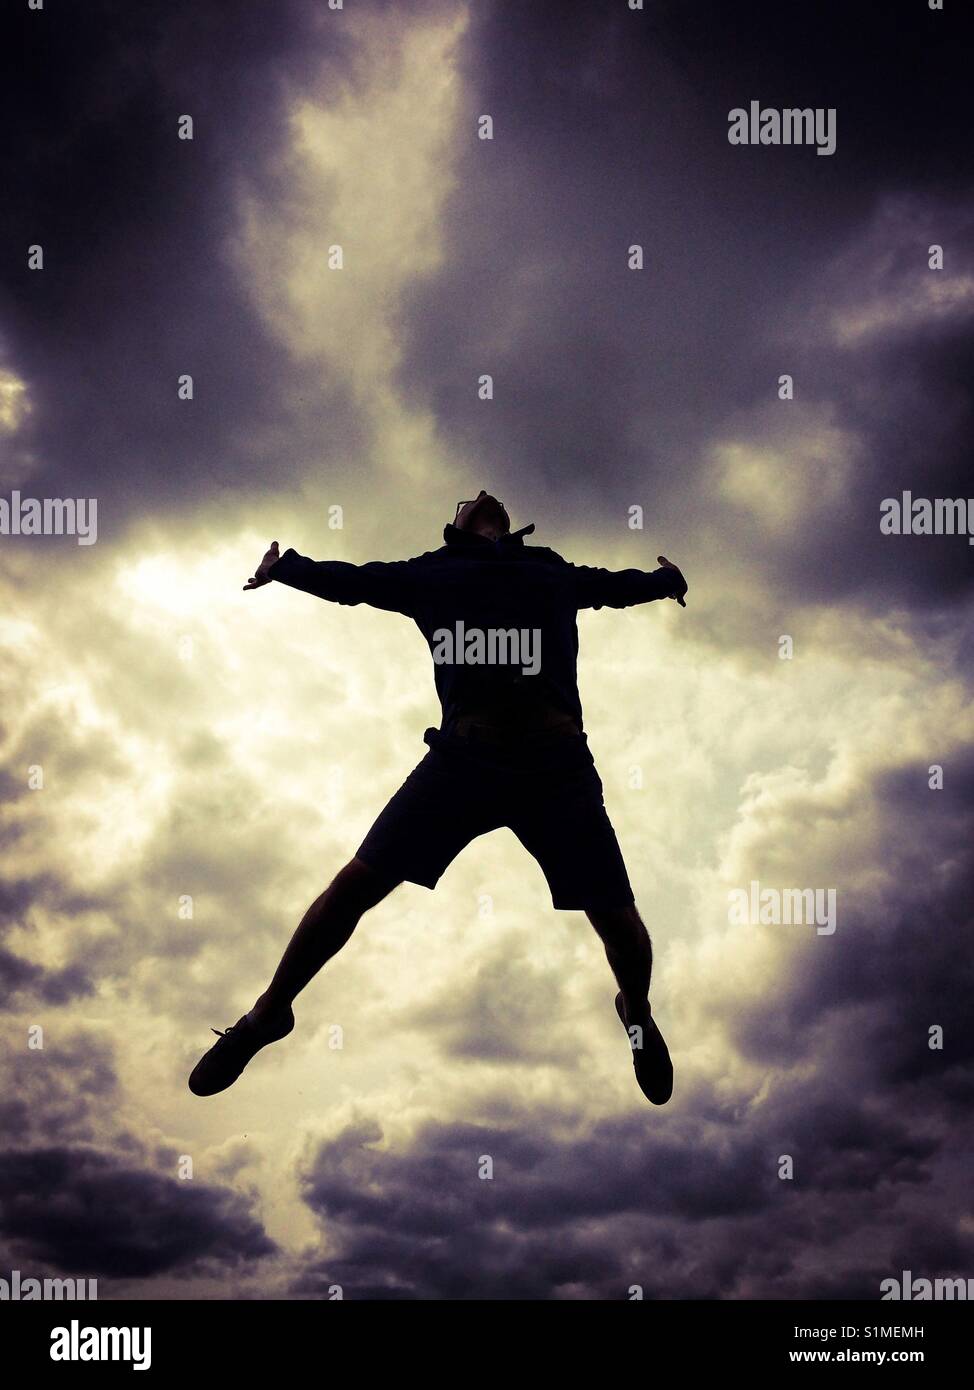 A man jumping high in the air with his arms and legs spread as if falling with a dramatic, stormy sky behind Stock Photo